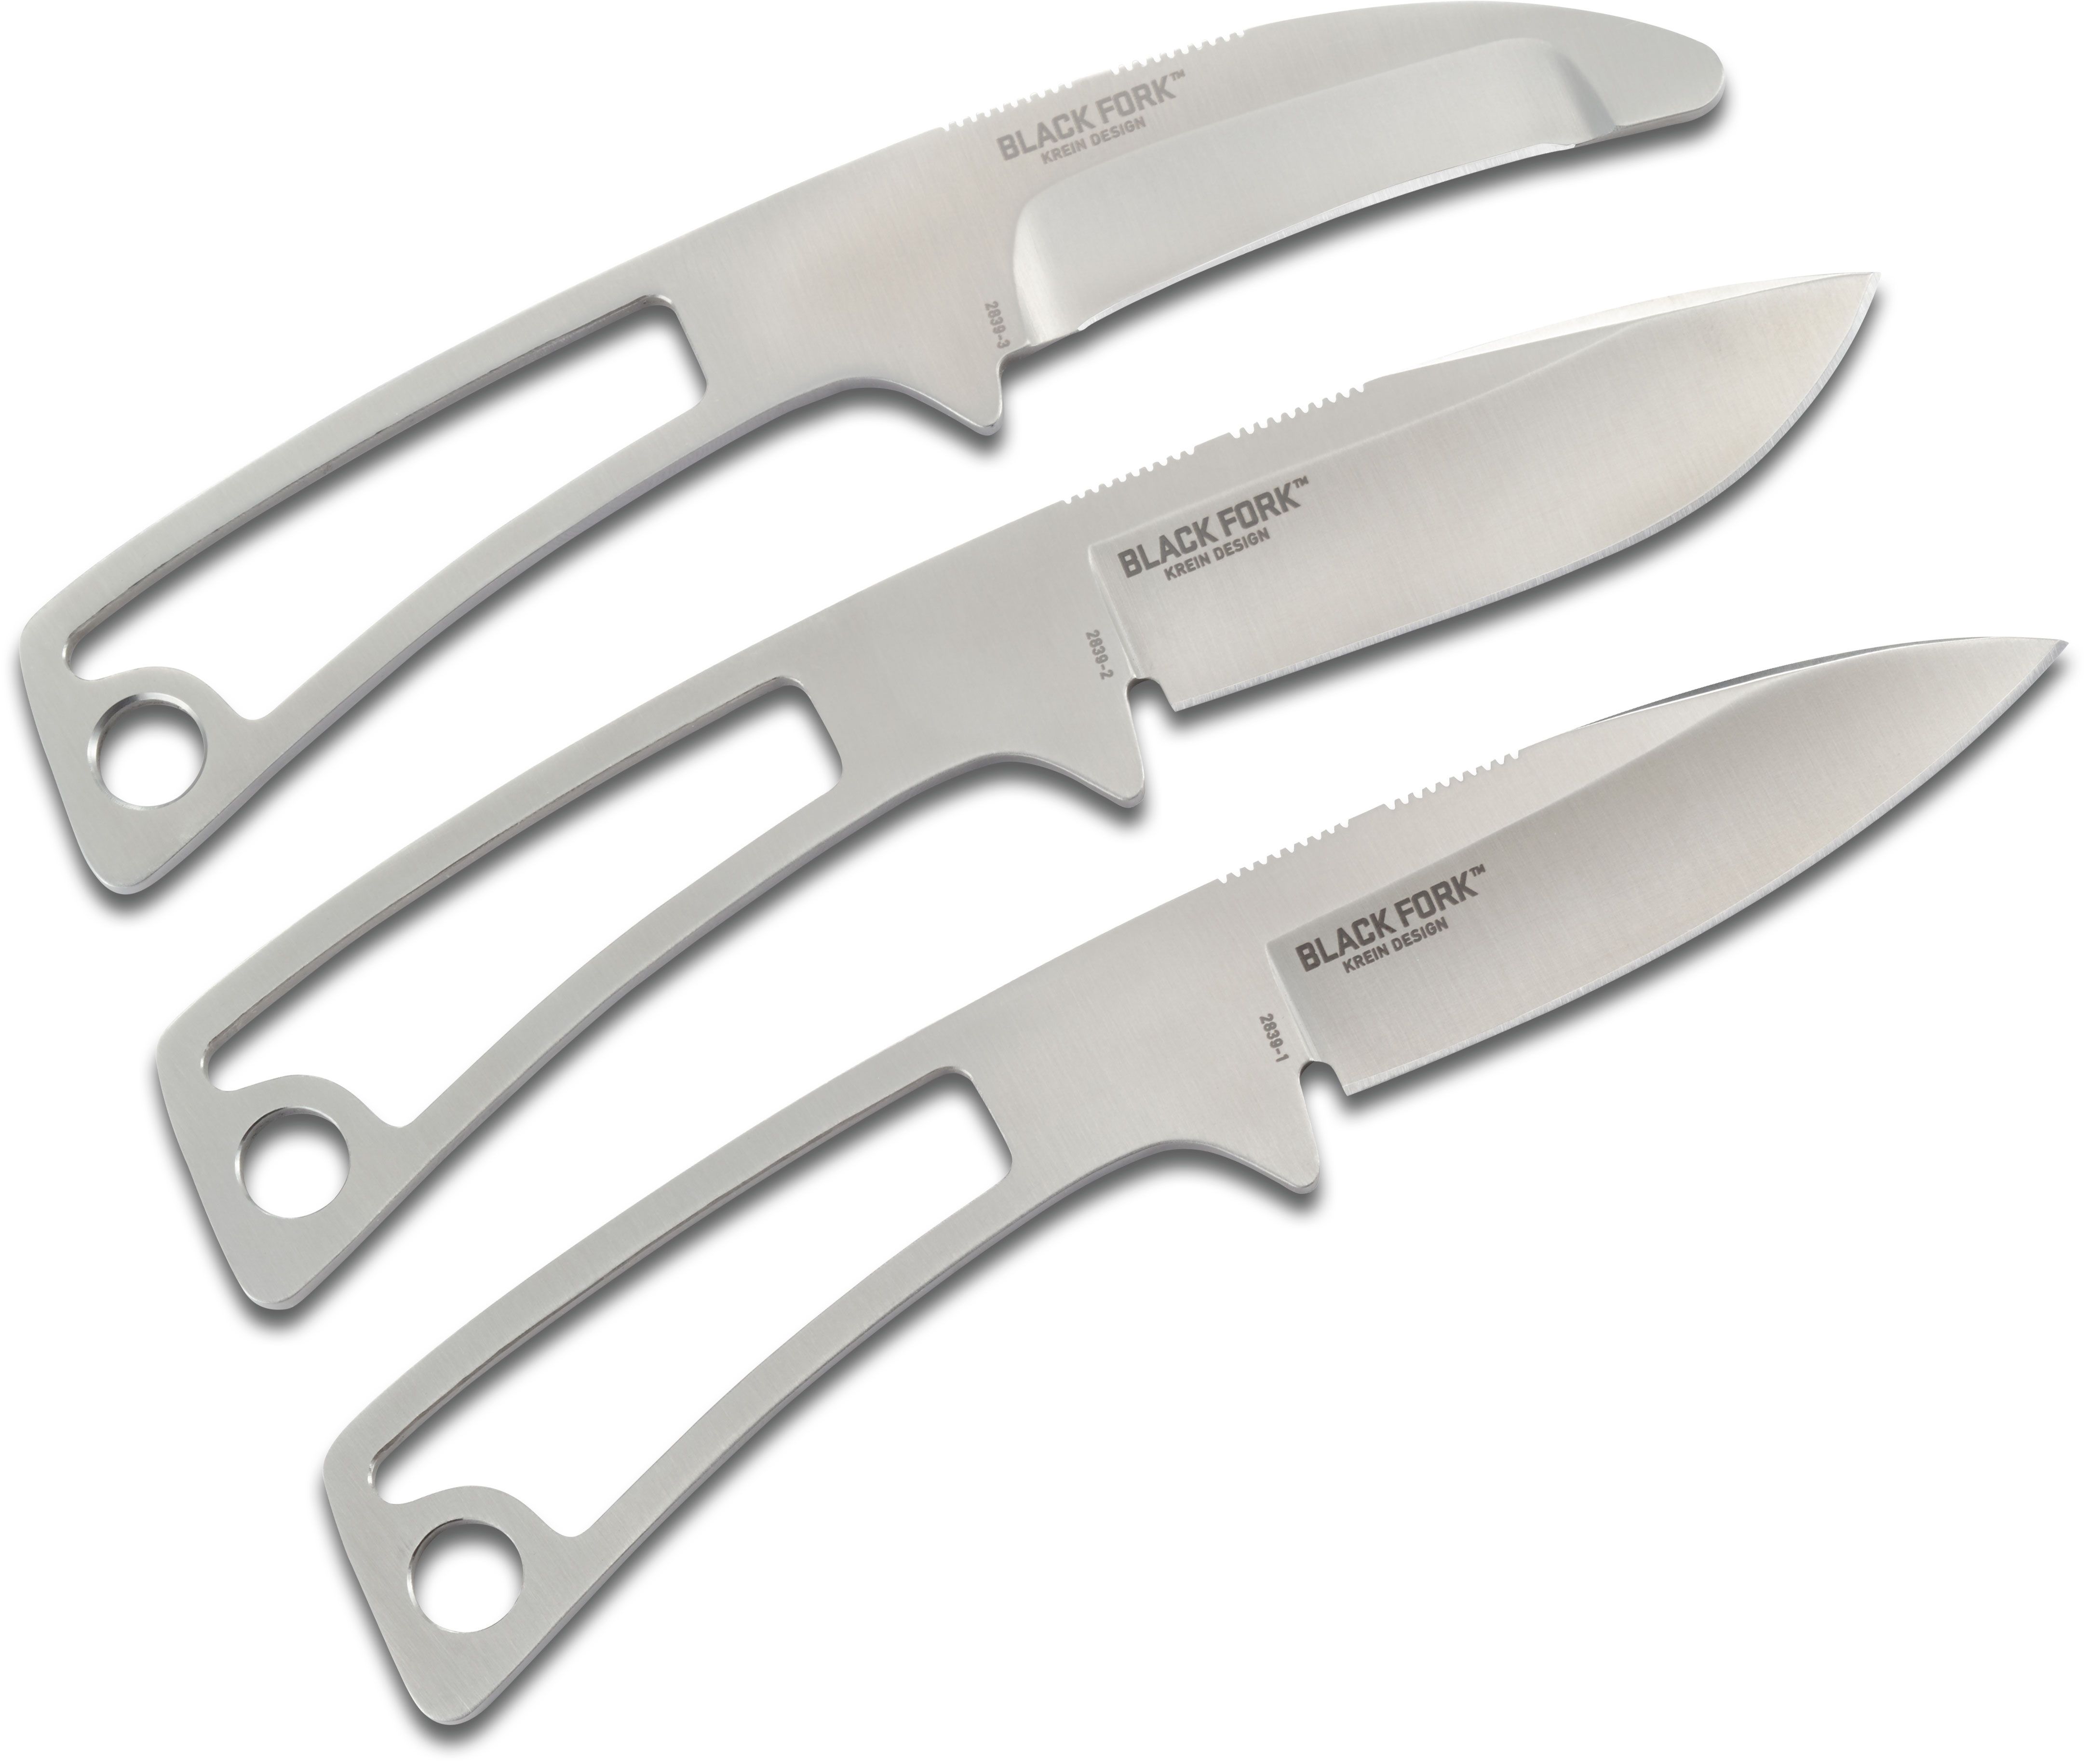 CRKT 2839 Black Fork 3-Piece Stainless Fixed Blade Hunting Knife